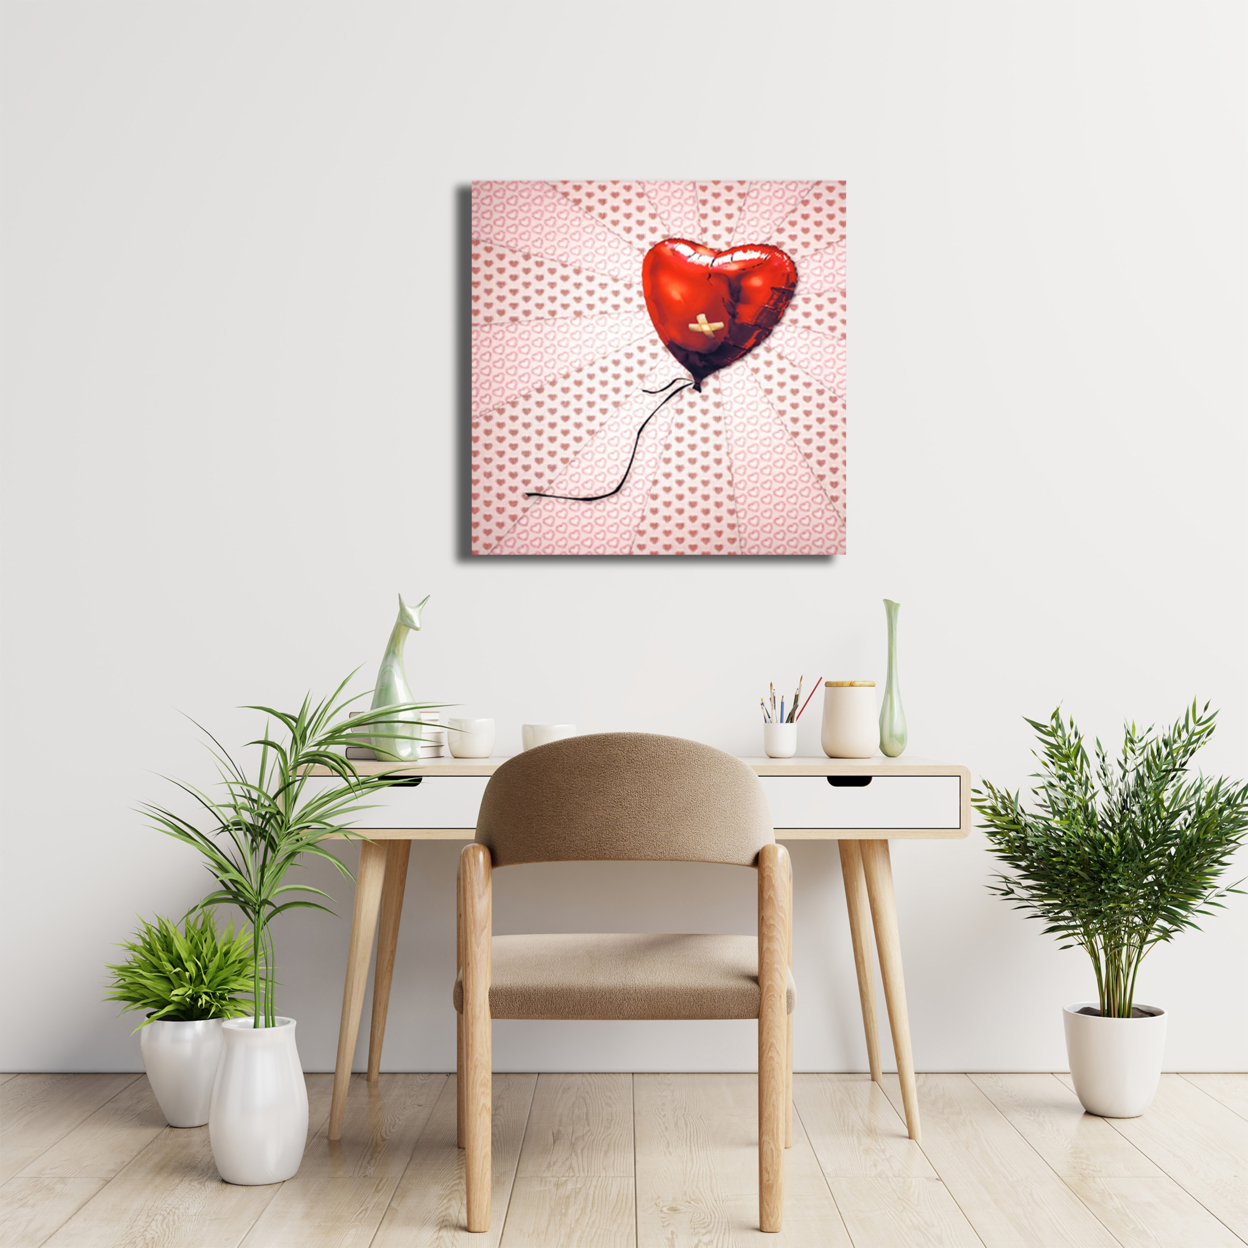 5D Multi-Dimensional Wall Art - Custom Made Balloon Heart Wall Art Print On Strong Polycarbonate Panel With Vibrant Colors (12x12 Inches)